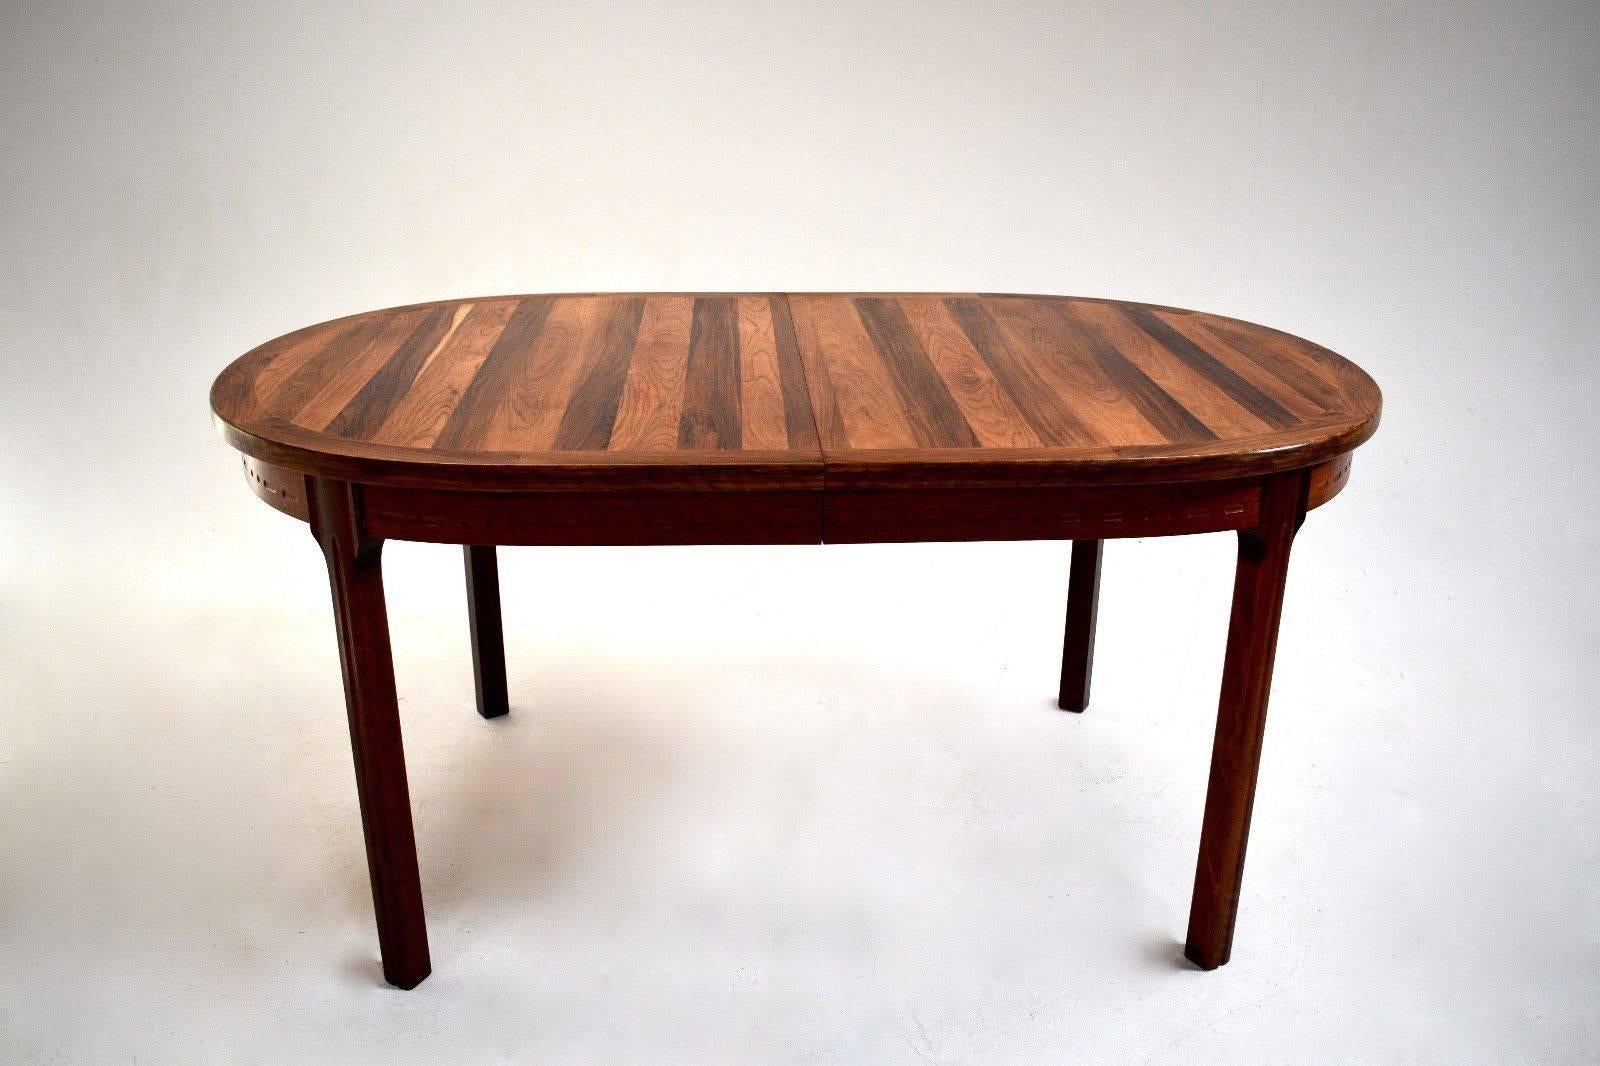 Swedish Nils Jonsson Rosewood Oval Dining Table Midcentury, 1960s For Sale 1